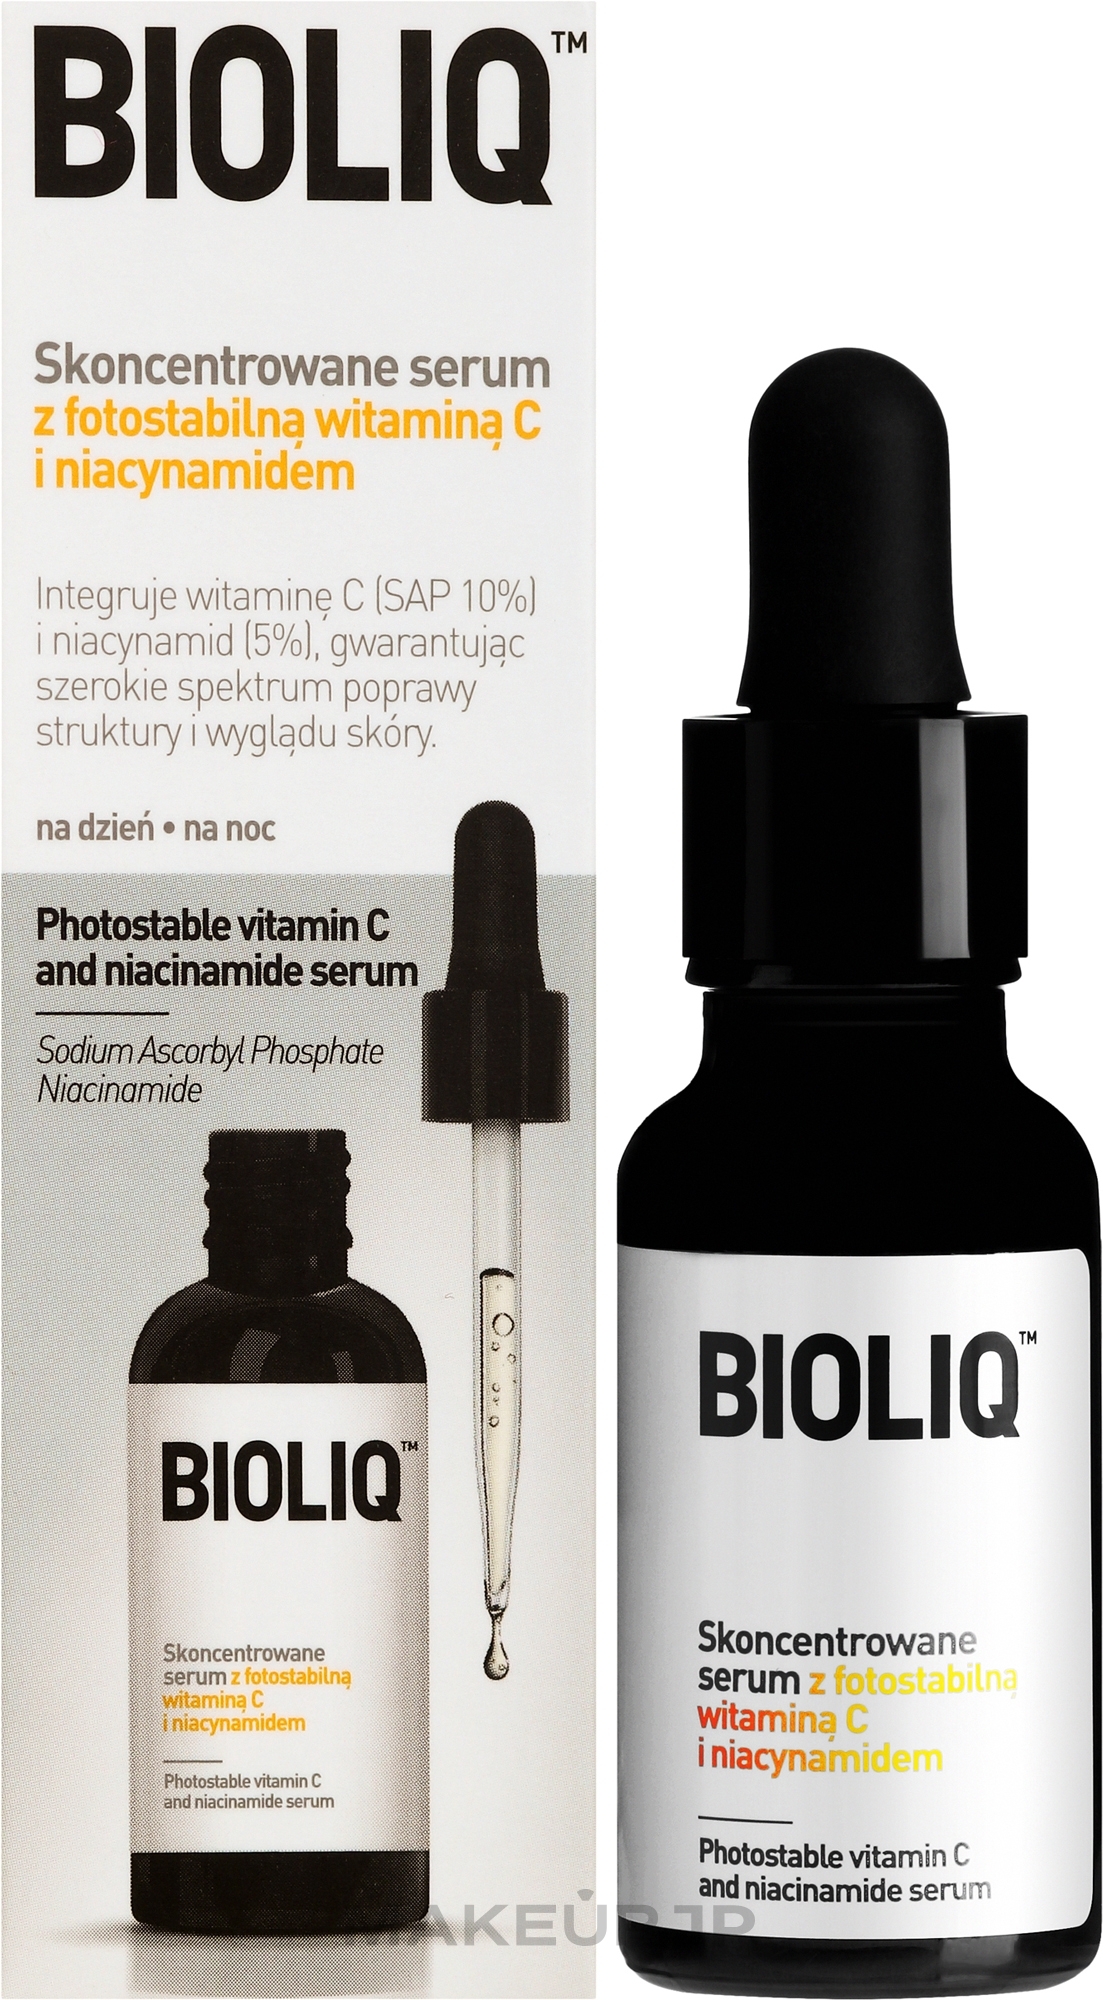 Concentrated Serum with Photo-Stable Vitamin C & Niacinamide - Bioliq Pro Photostable Vitamin C And Niacinamide Serum — photo 20 ml